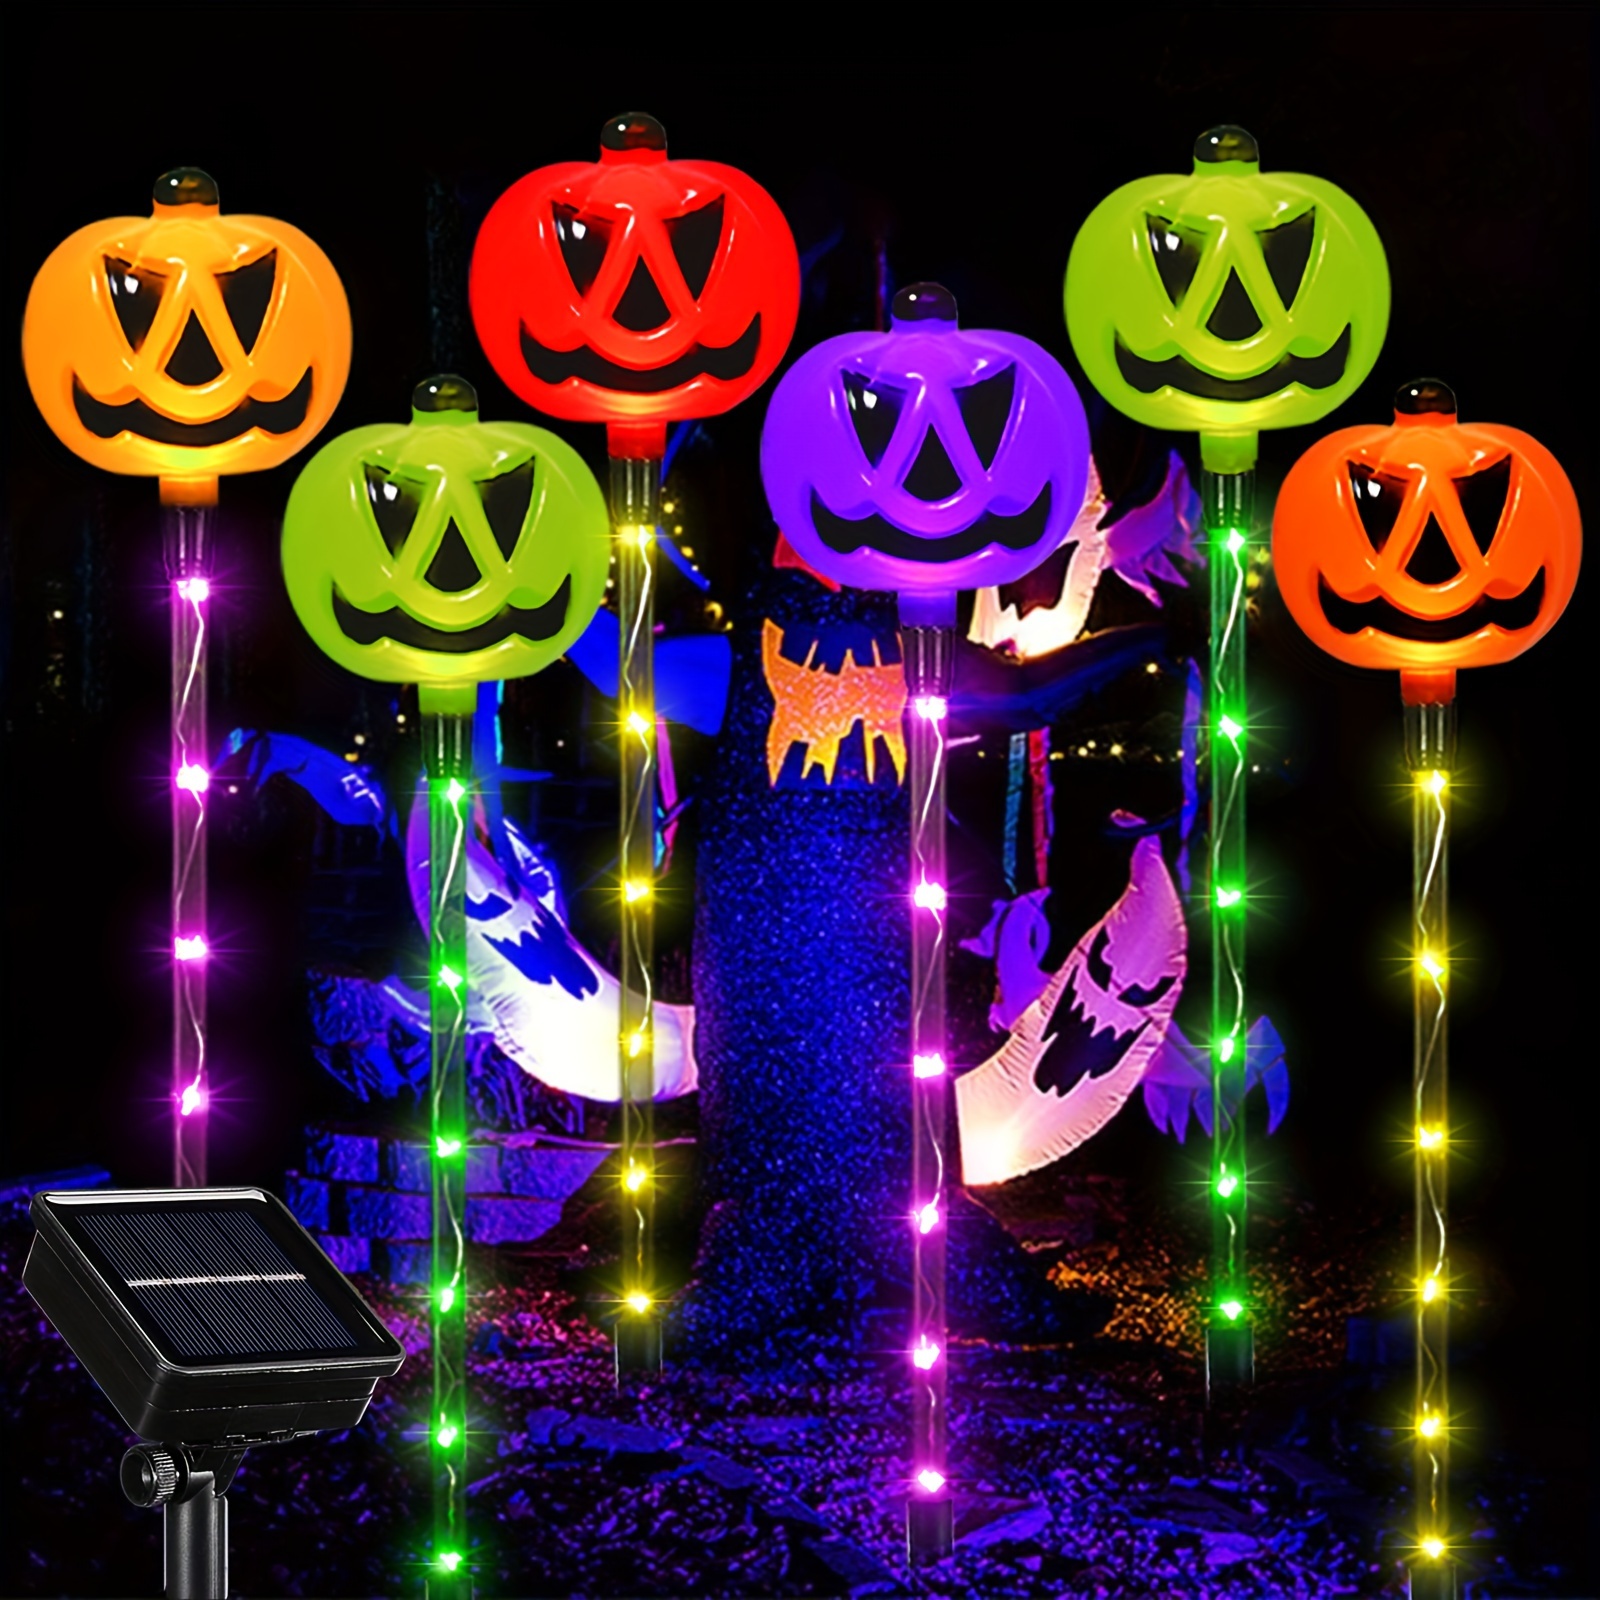 

A Set Of 6 Solar Pumpkin Passage Lights For Halloween Outdoor Decoration, Color-changing Outdoor Halloween Lights, Light Up Jack O Lantern Pumpkins For Halloween Party Porch Yard Cemetery Decoration